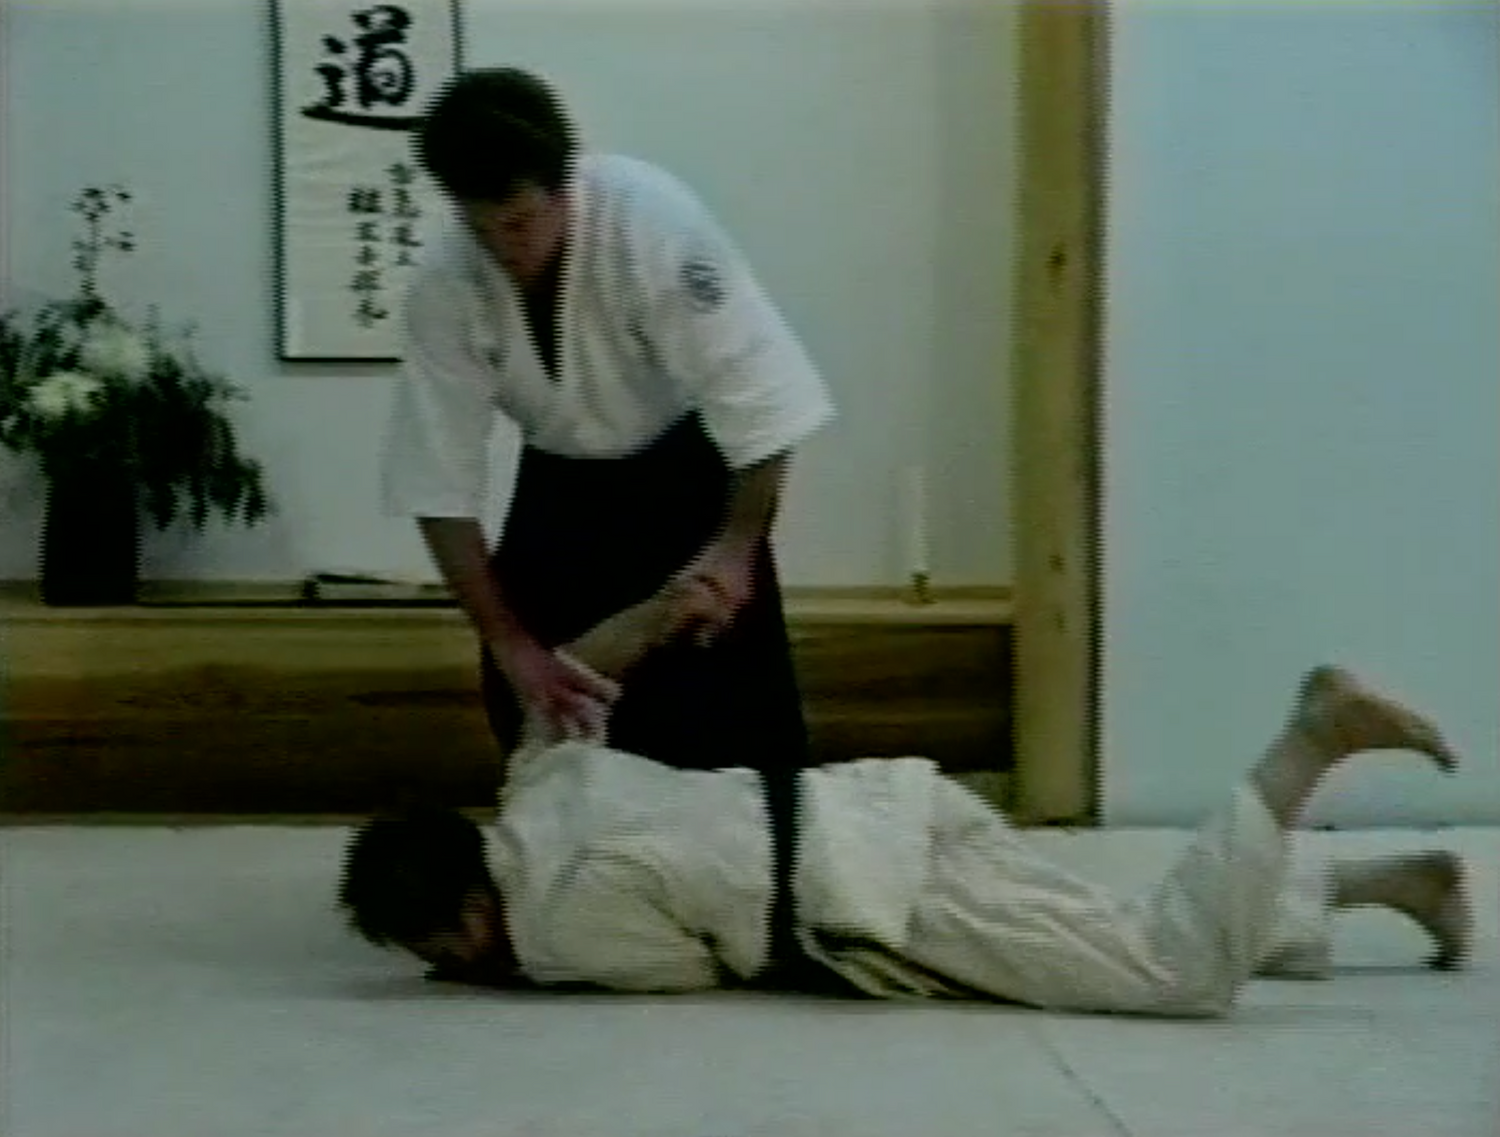 Aikido for Children DVD by Bruce Bookman - Budovideos Inc